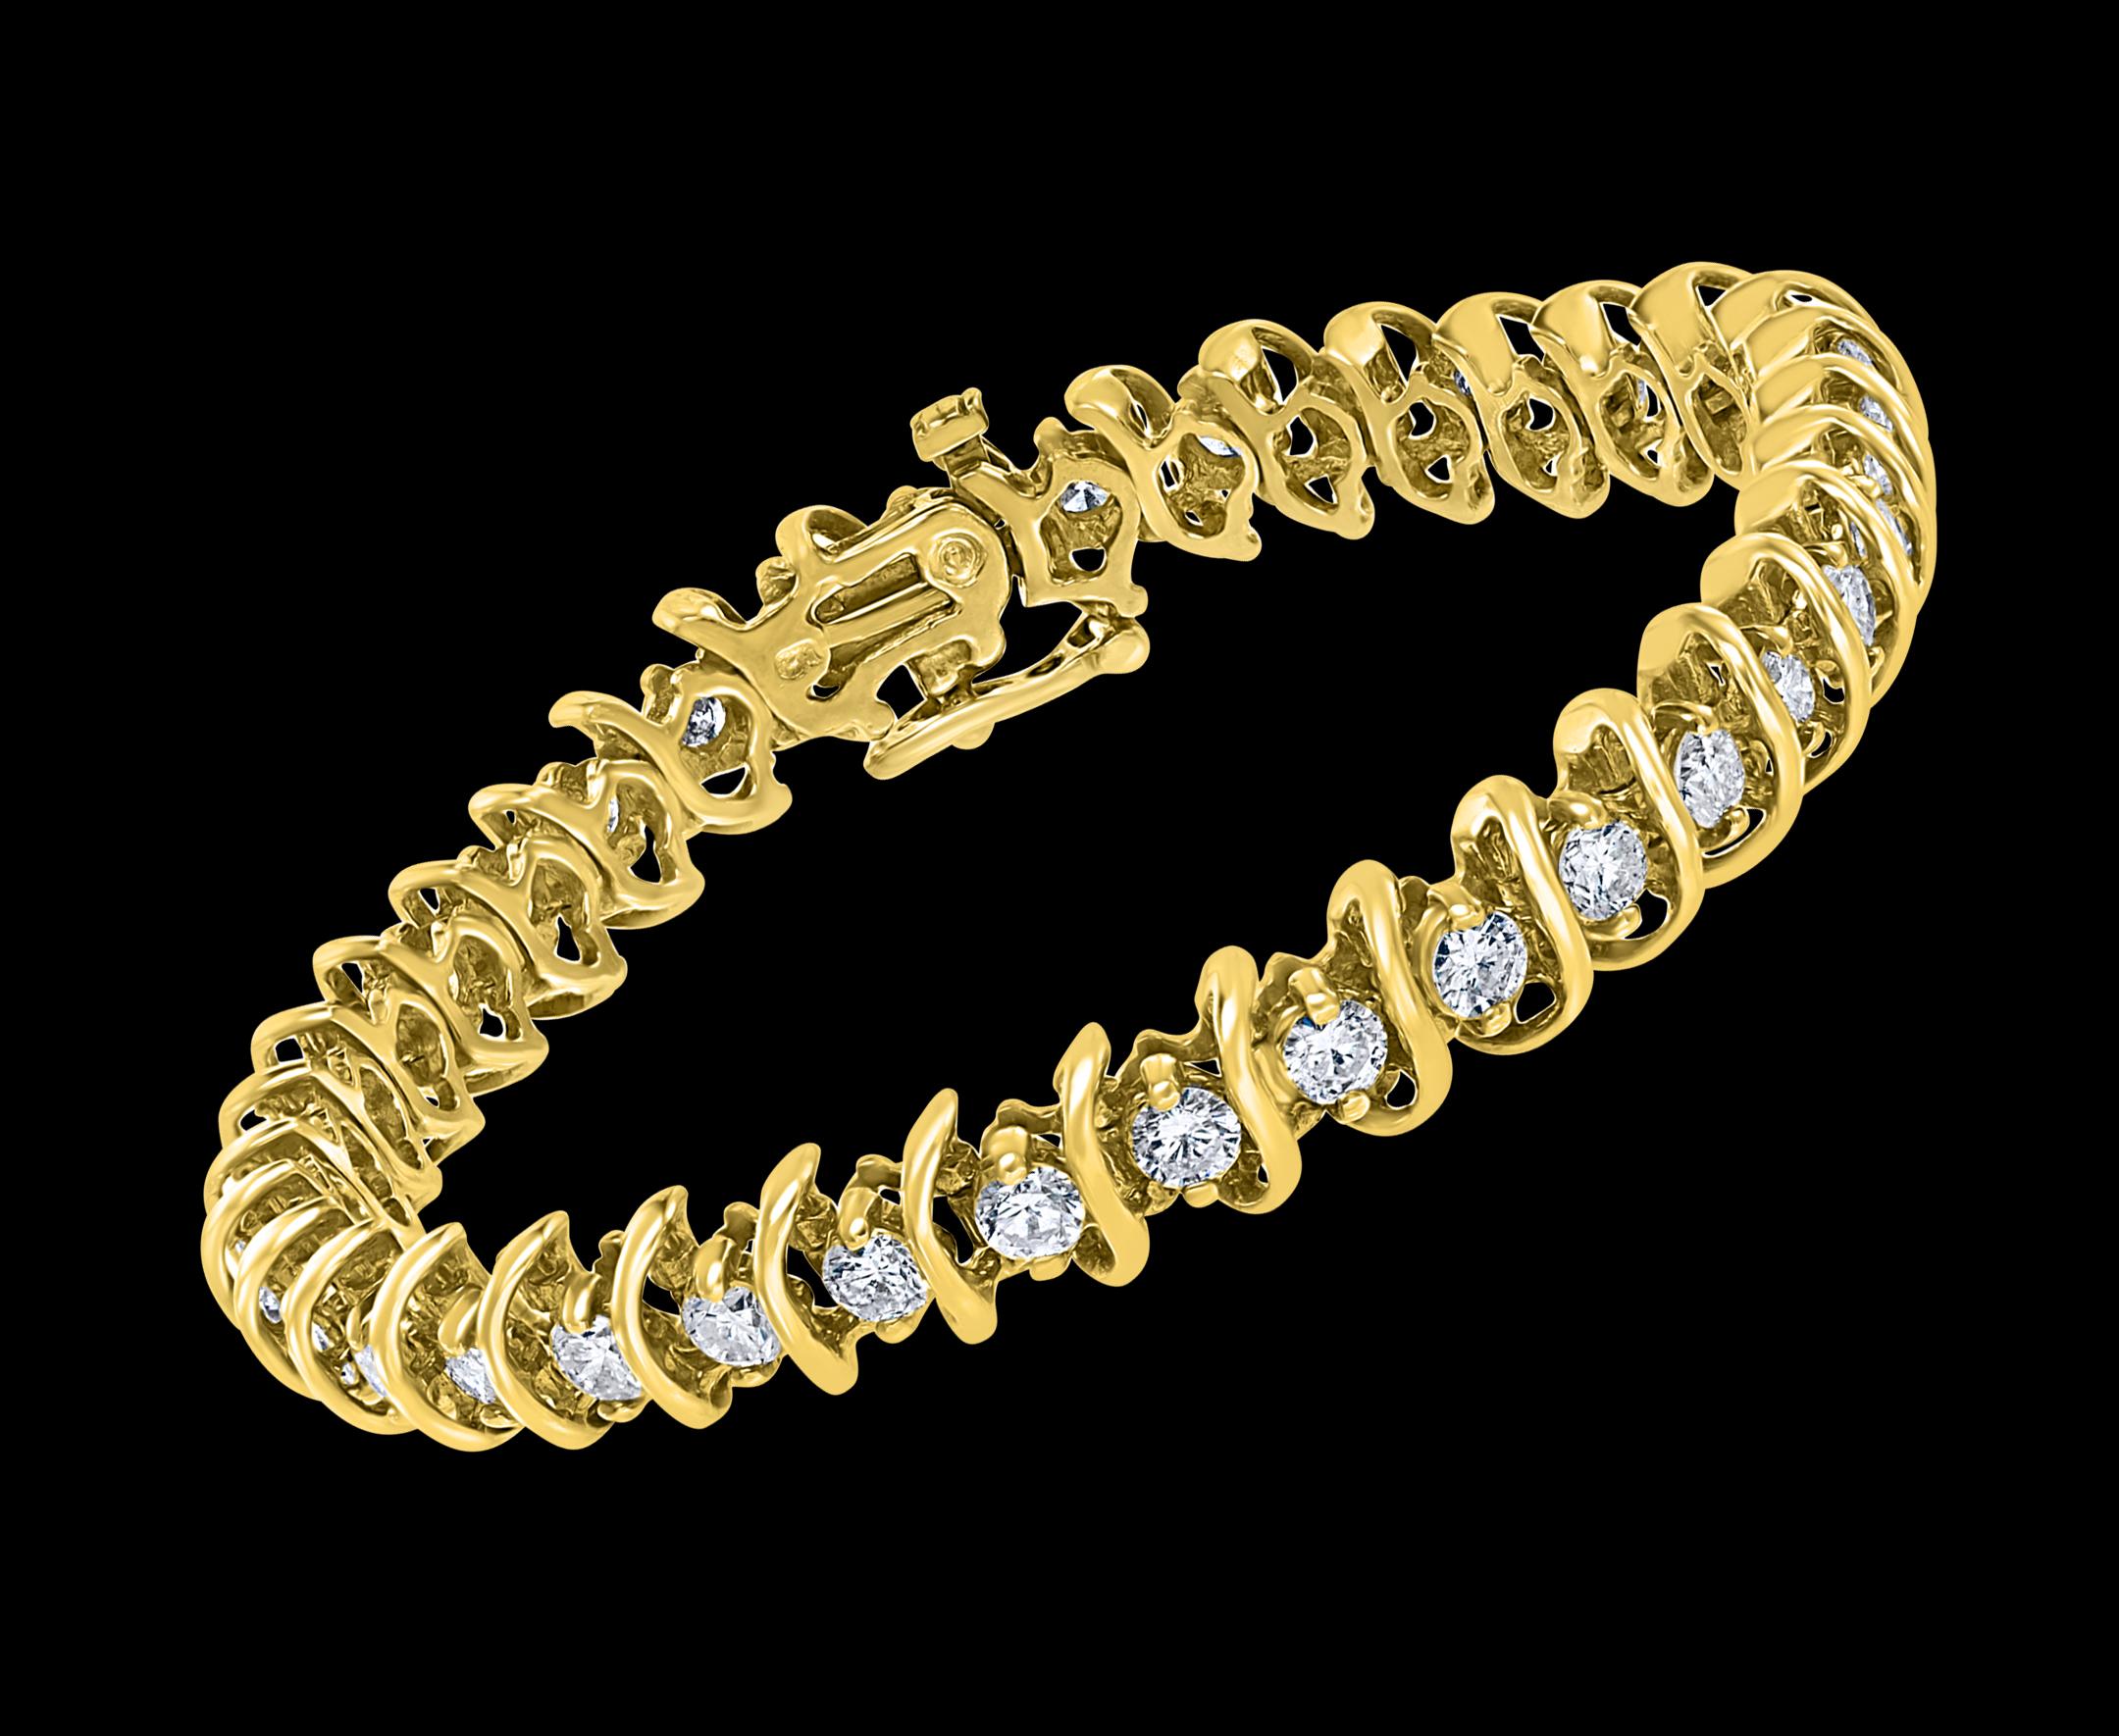 
36 Round Diamond 20-23 Pointer Each Tennis Bracelet in 14 K Yellow Gold 7 Ct Line Bracelet
Meet the ultimate bold tennis bracelet. The single row of prong set  Round Brilliant cut Diamonds.
20-23 pointer each , 36 Total pieces approximately 7 